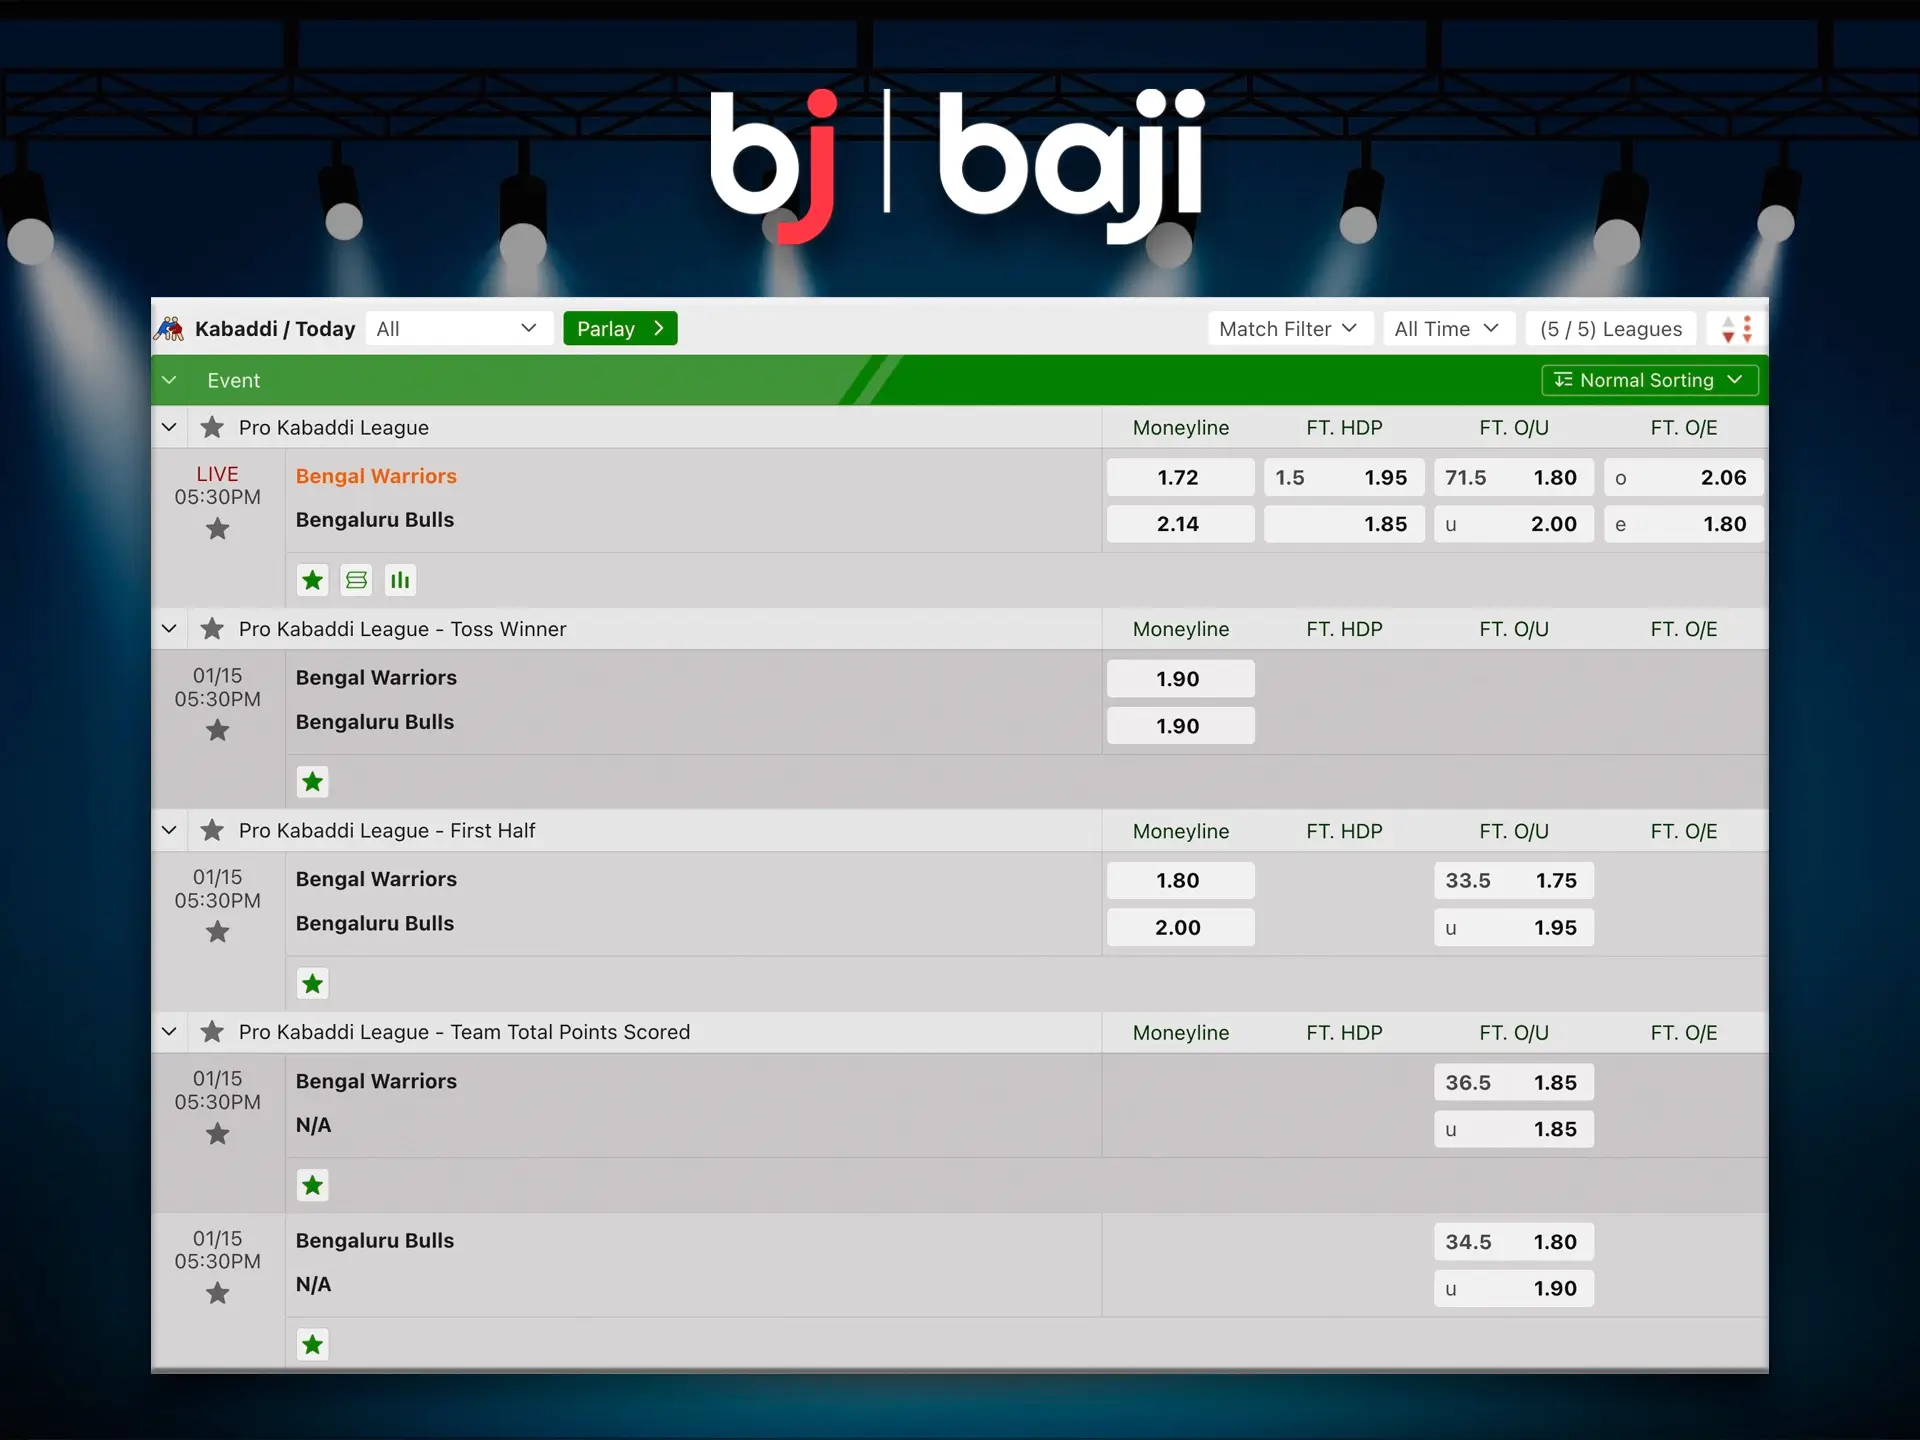 Baji is known for its quick and easy website where you can easily find Kabaddi.